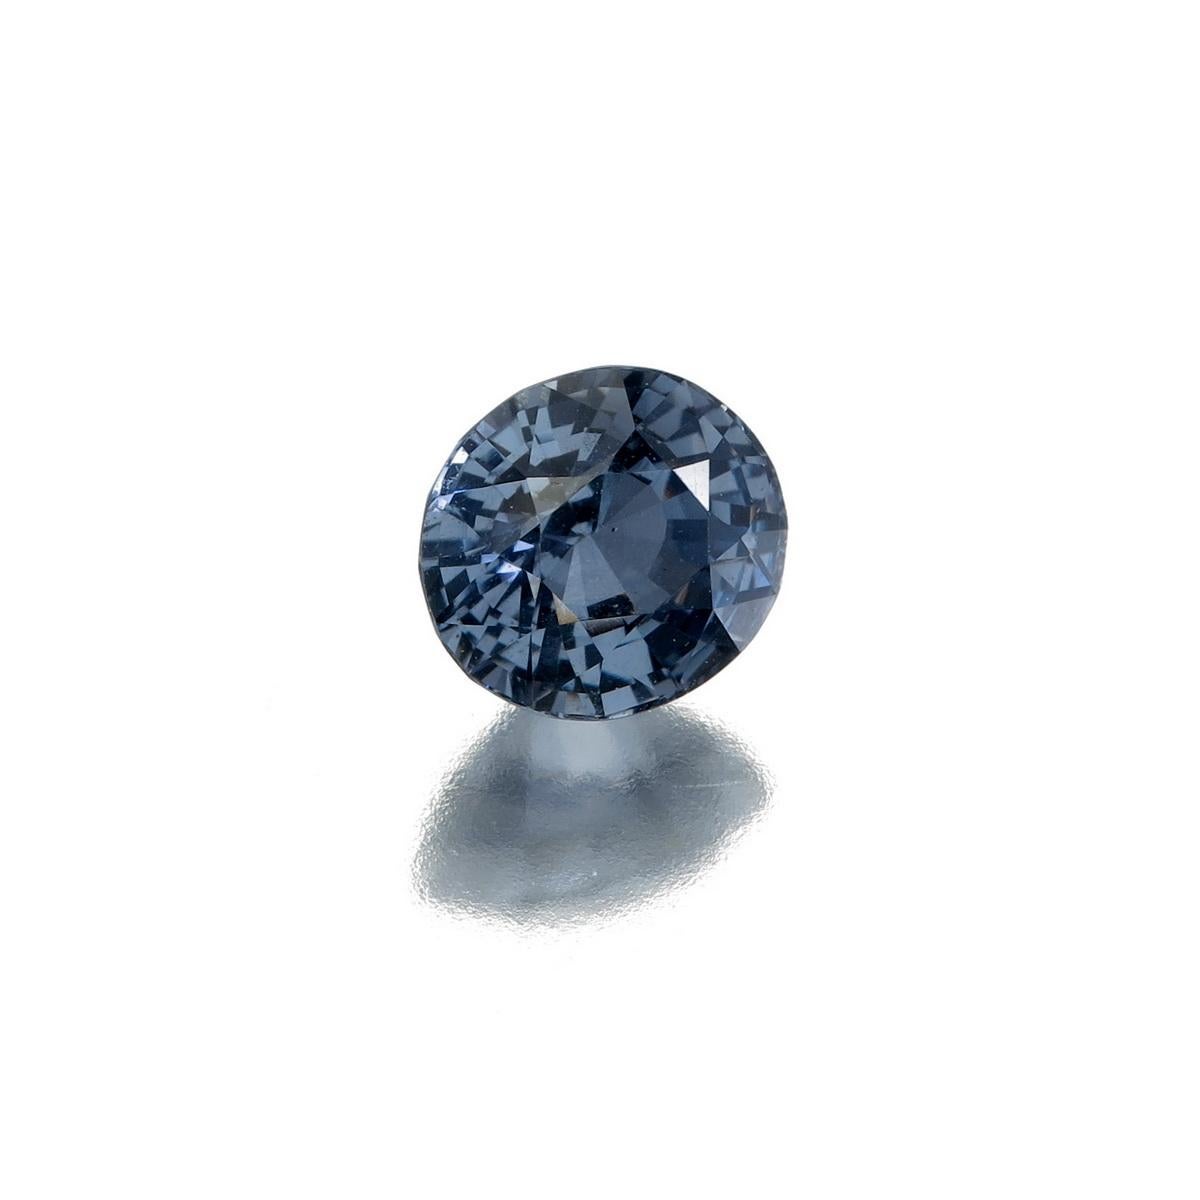 GIL Certified 1.91 carat Cobalt Blue Natural Spinel from Burma
Weight: 1.91 Carat
Dimension: 7.66 x 6.99 x 4.86 mm
Cut: Oval
No Heat